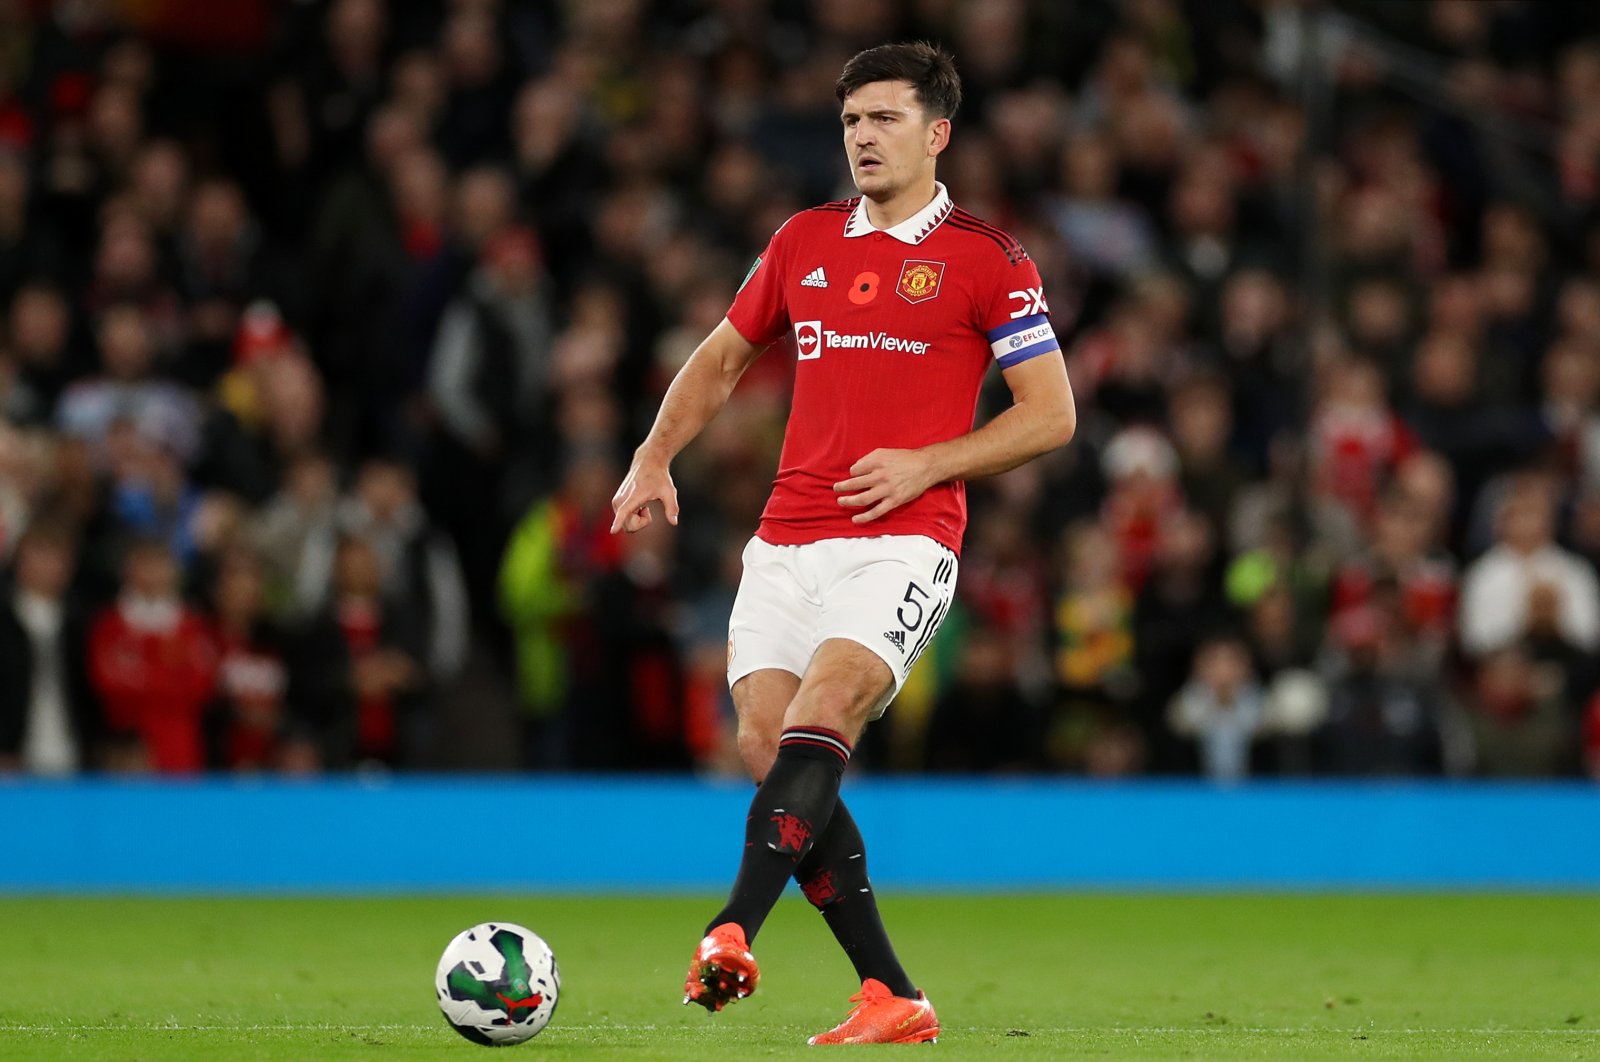 Harry Maguire in action during the Manchester United and Aston Villa match at the Old Trafford, Manchester, U.K., Nov. 10, 2022. (Getty Images Photo)